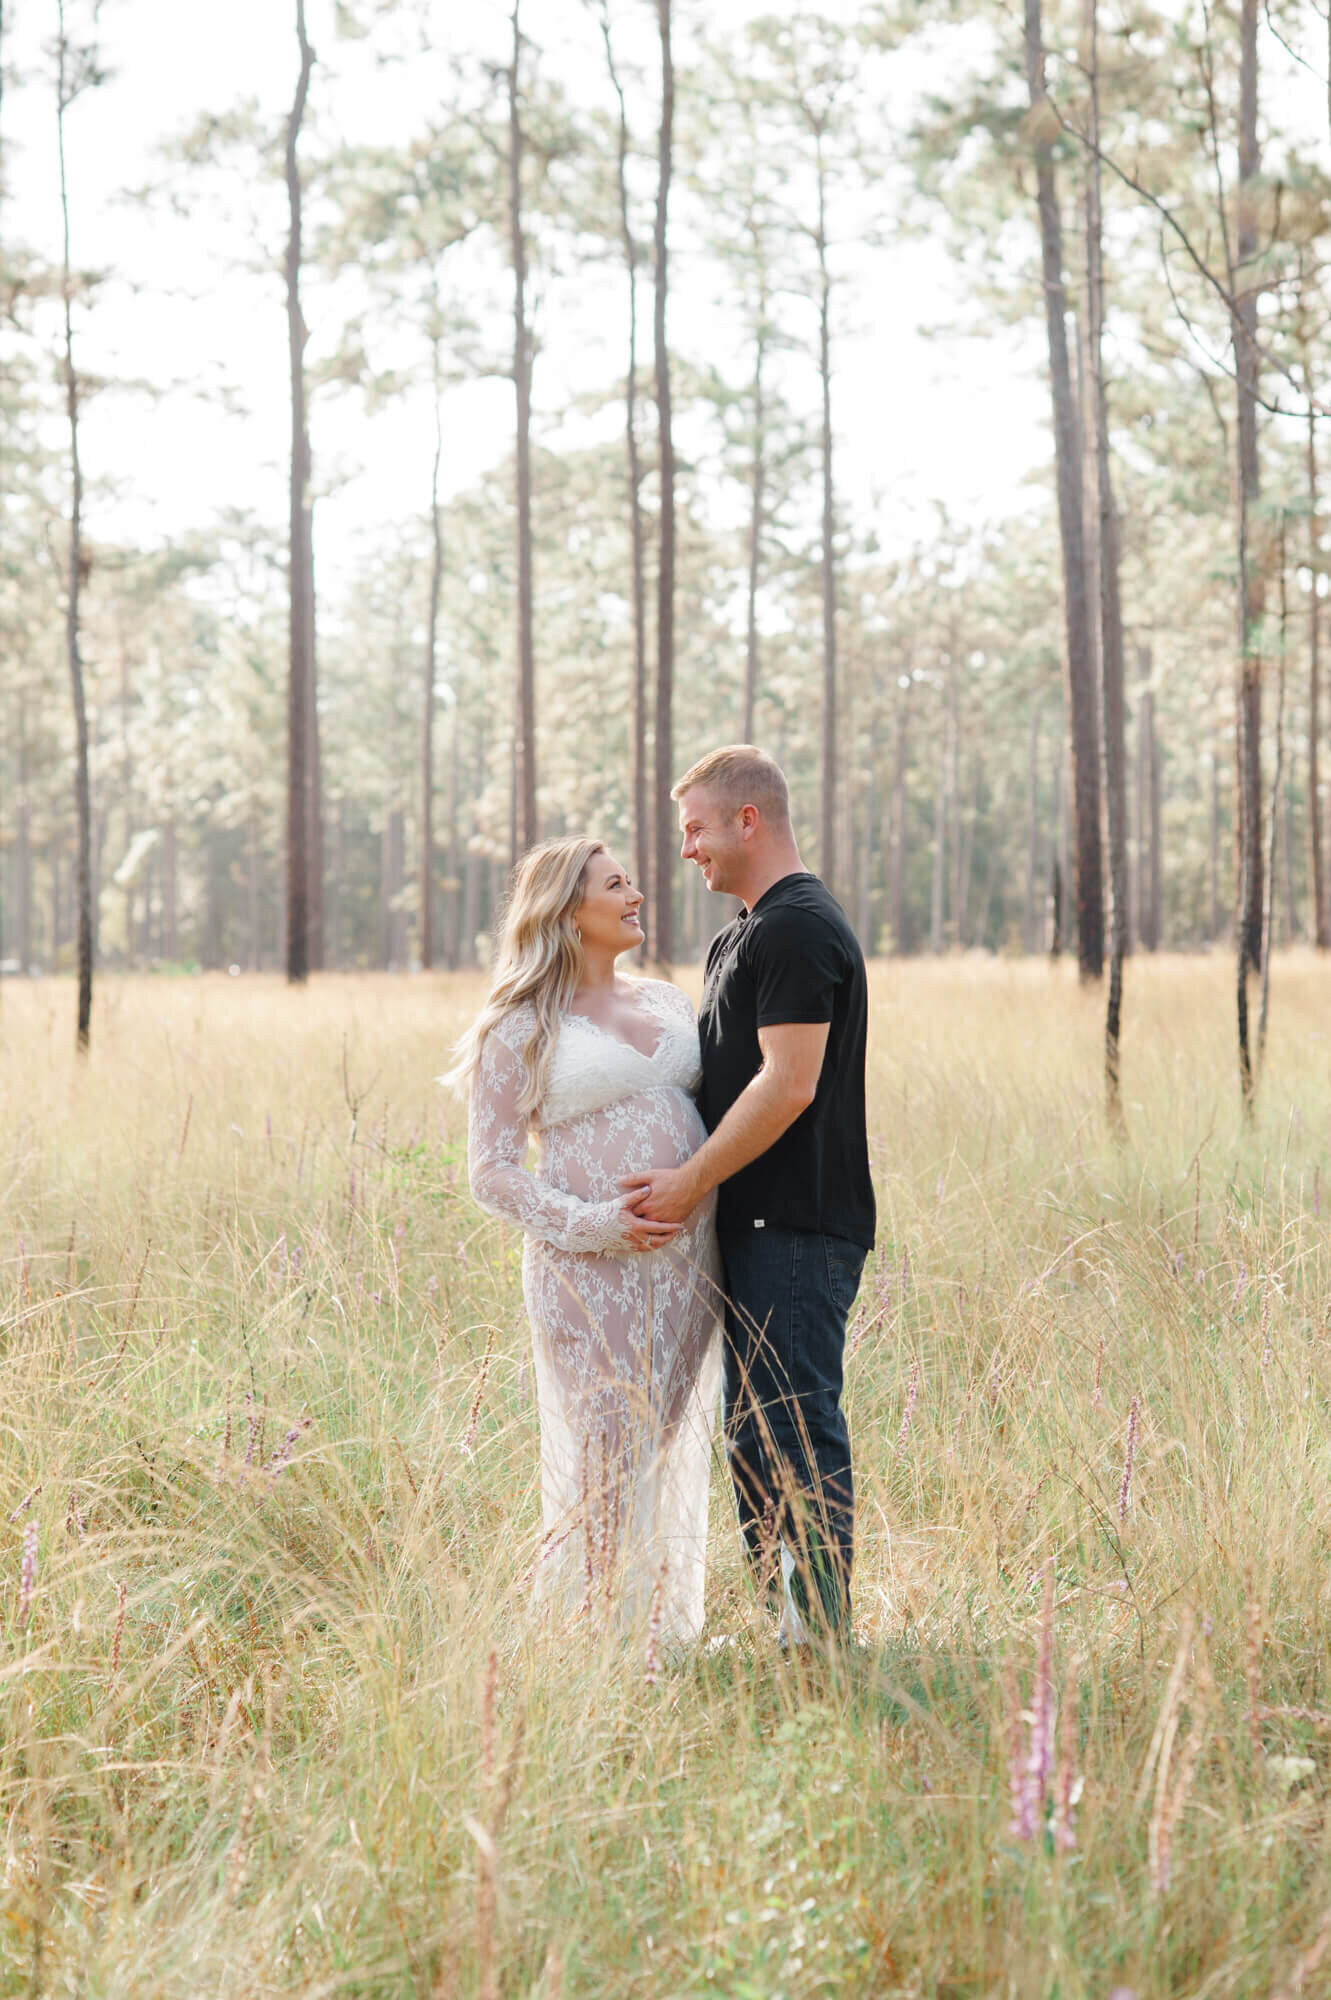 New parents stand in between tall trees and grass holding moms belly and staring deeply into each others eyes